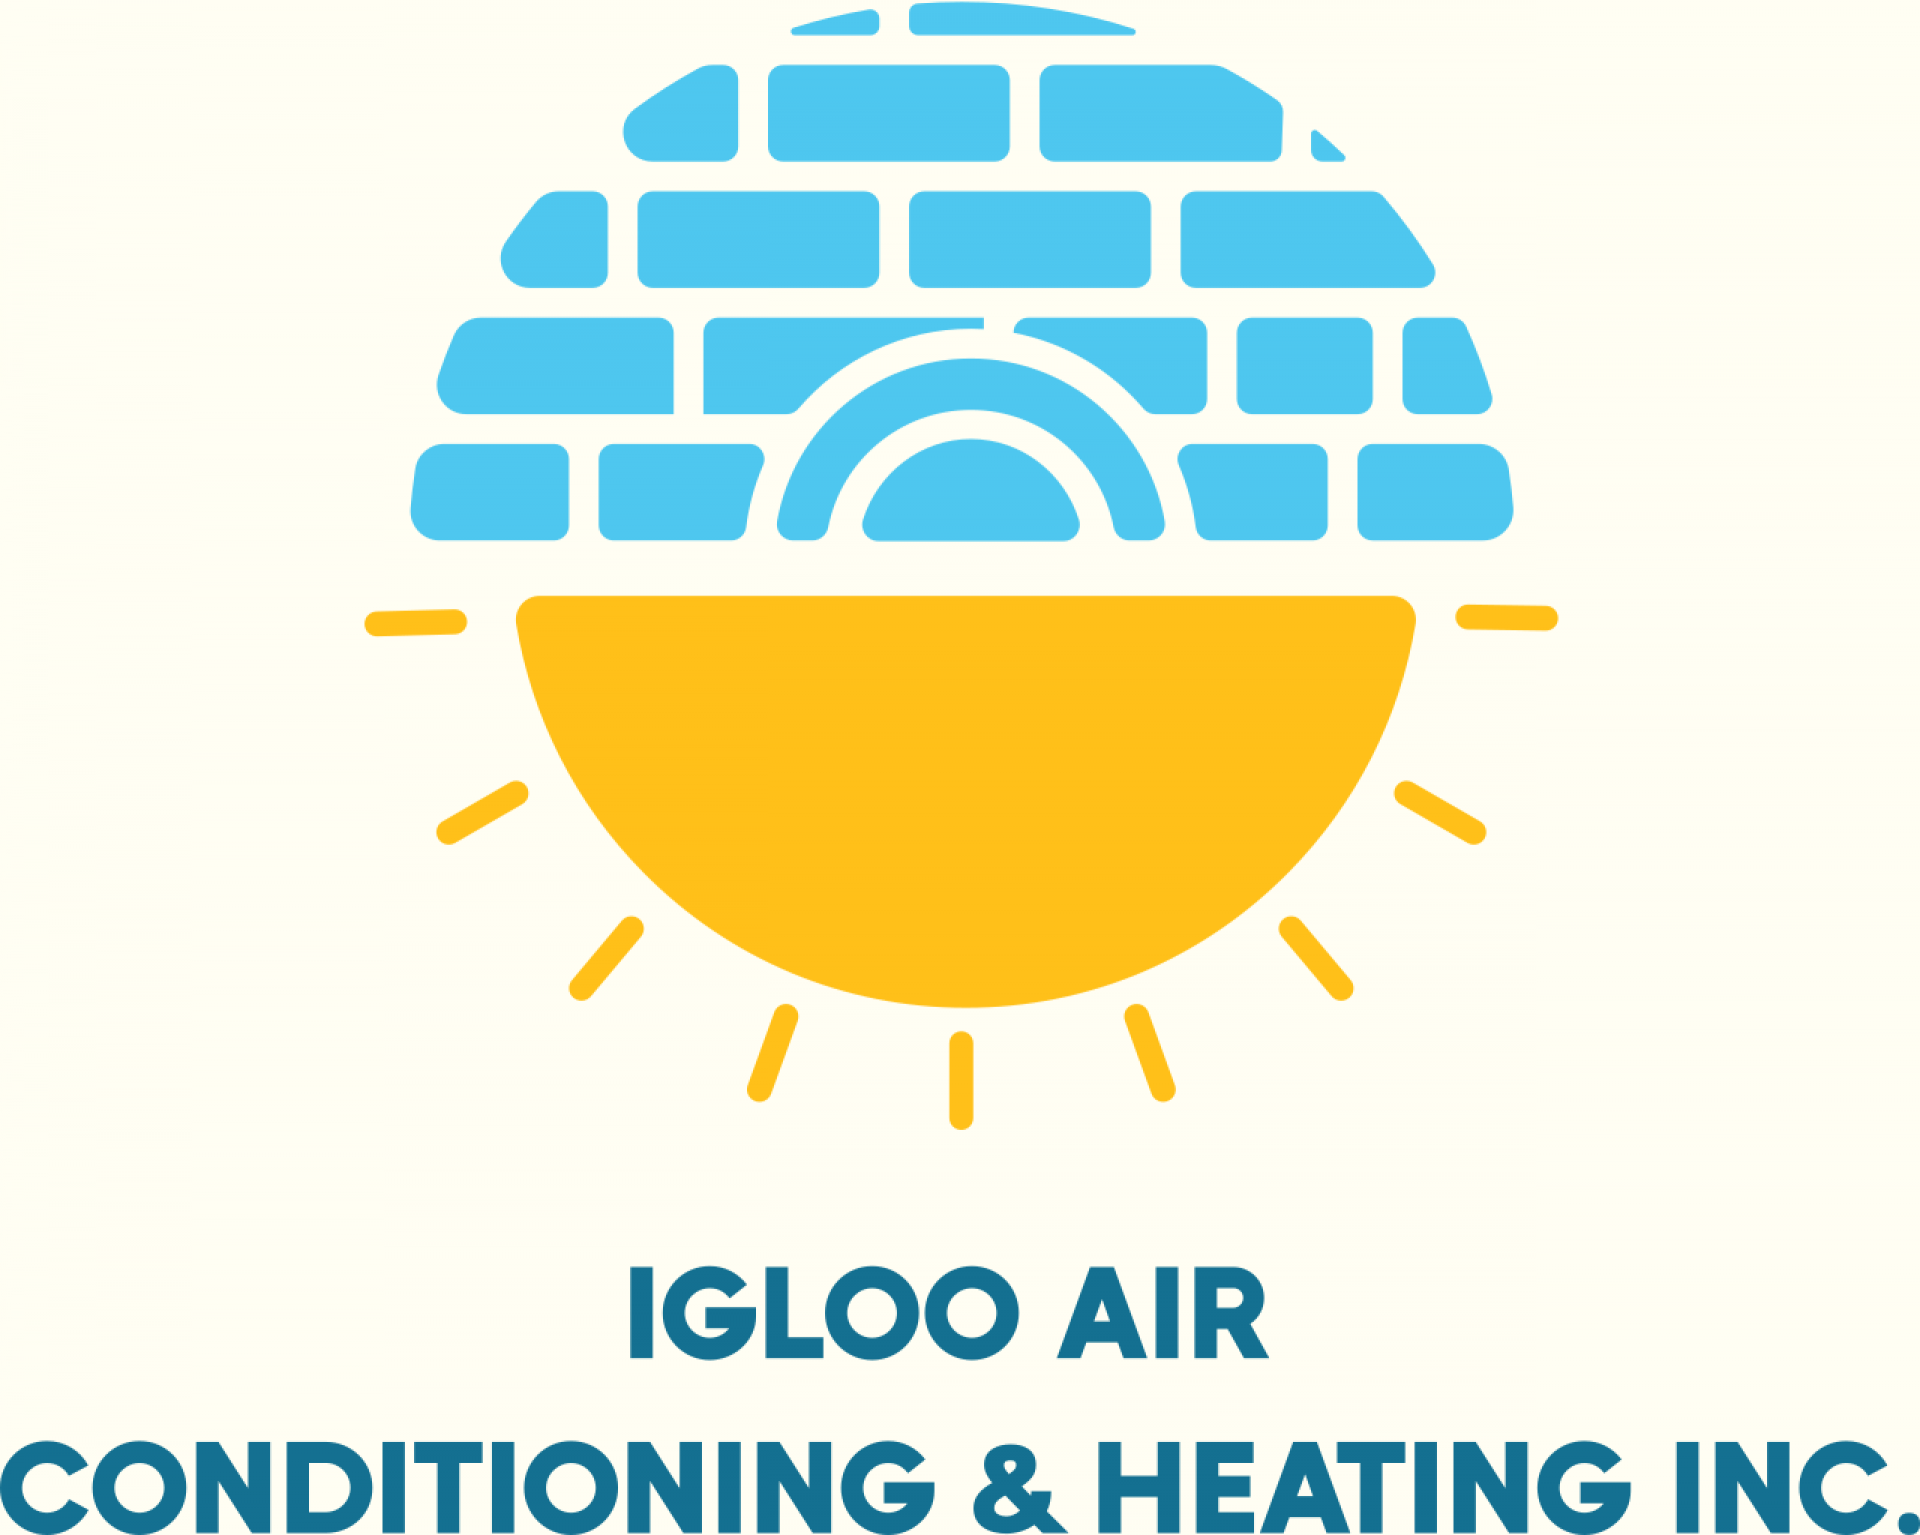 Igloo Air Conditioning and Heating Inc. logo